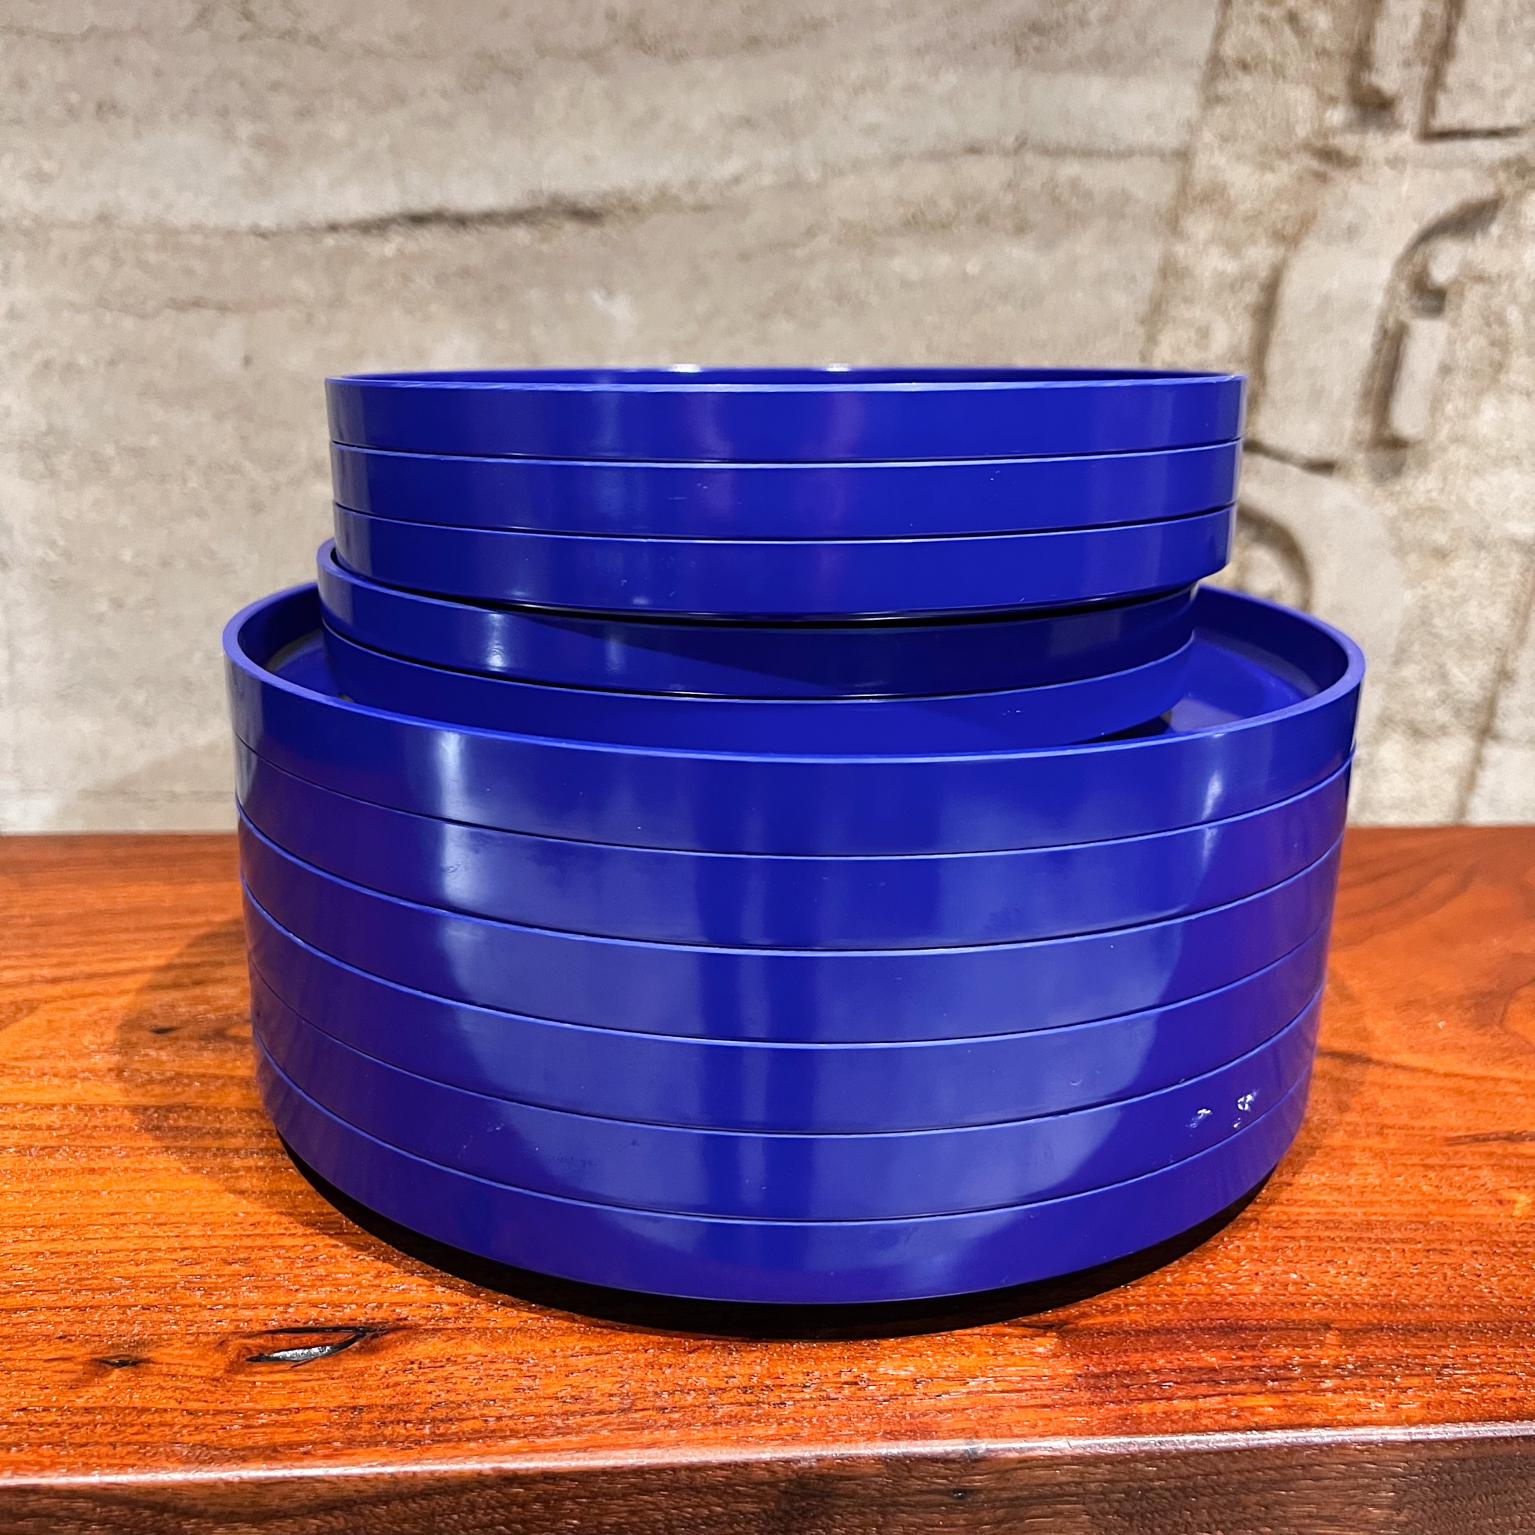 1964 MoMA Massimo & Lella Vignelli
11 Stackable Blue Plates Heller Design
Large 9.75 x 1 tall (6 plates)
Small 7.5 diameter x .75 tall (5 plates)
Stamped by maker.
Preowned vintage condition
See all images.